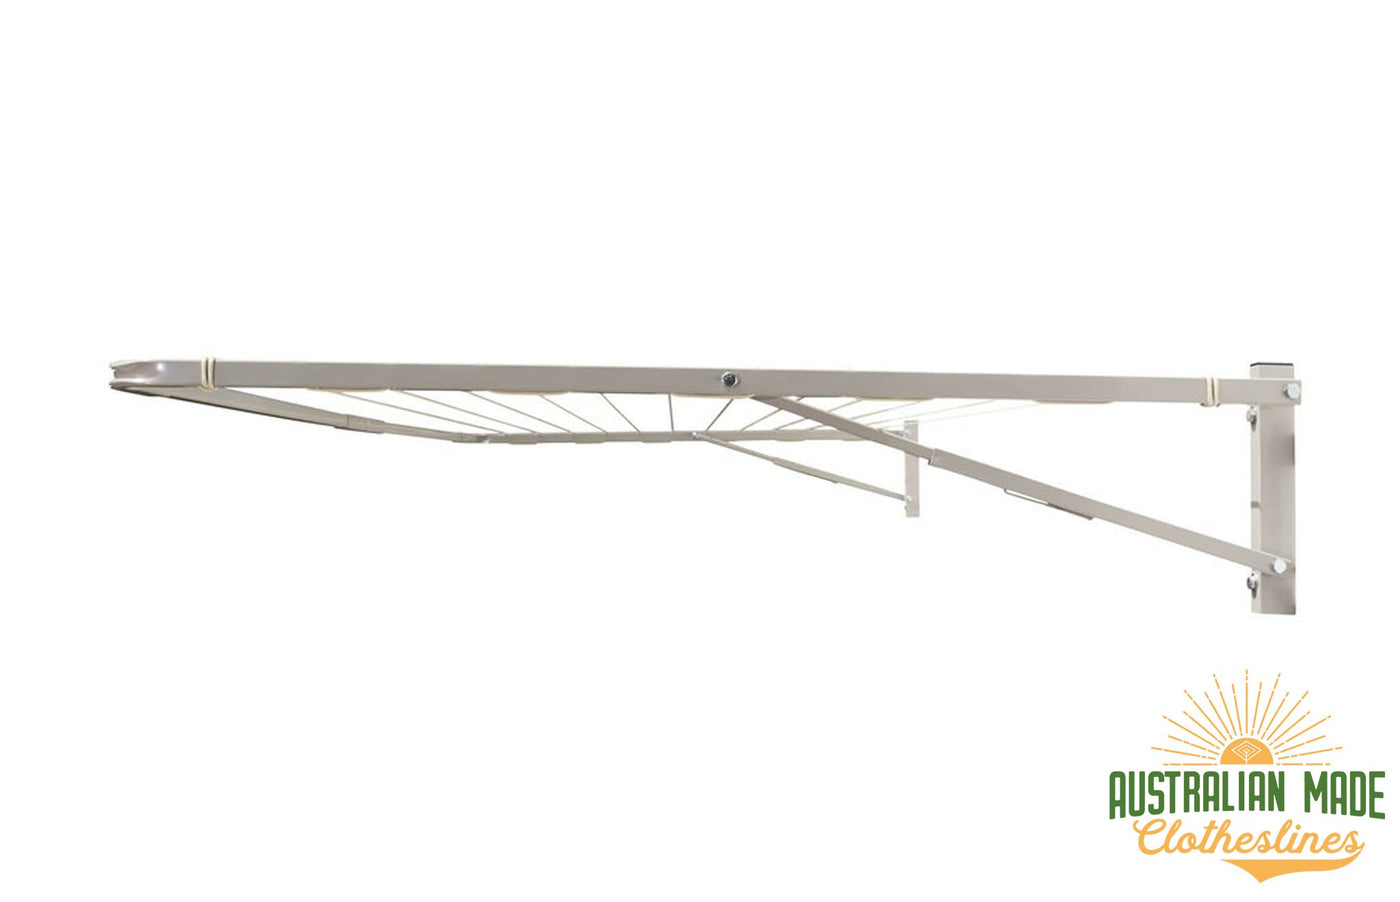 Eco 300 Clothesline - Surfmist Right Side View - Australian Made Clotheslines